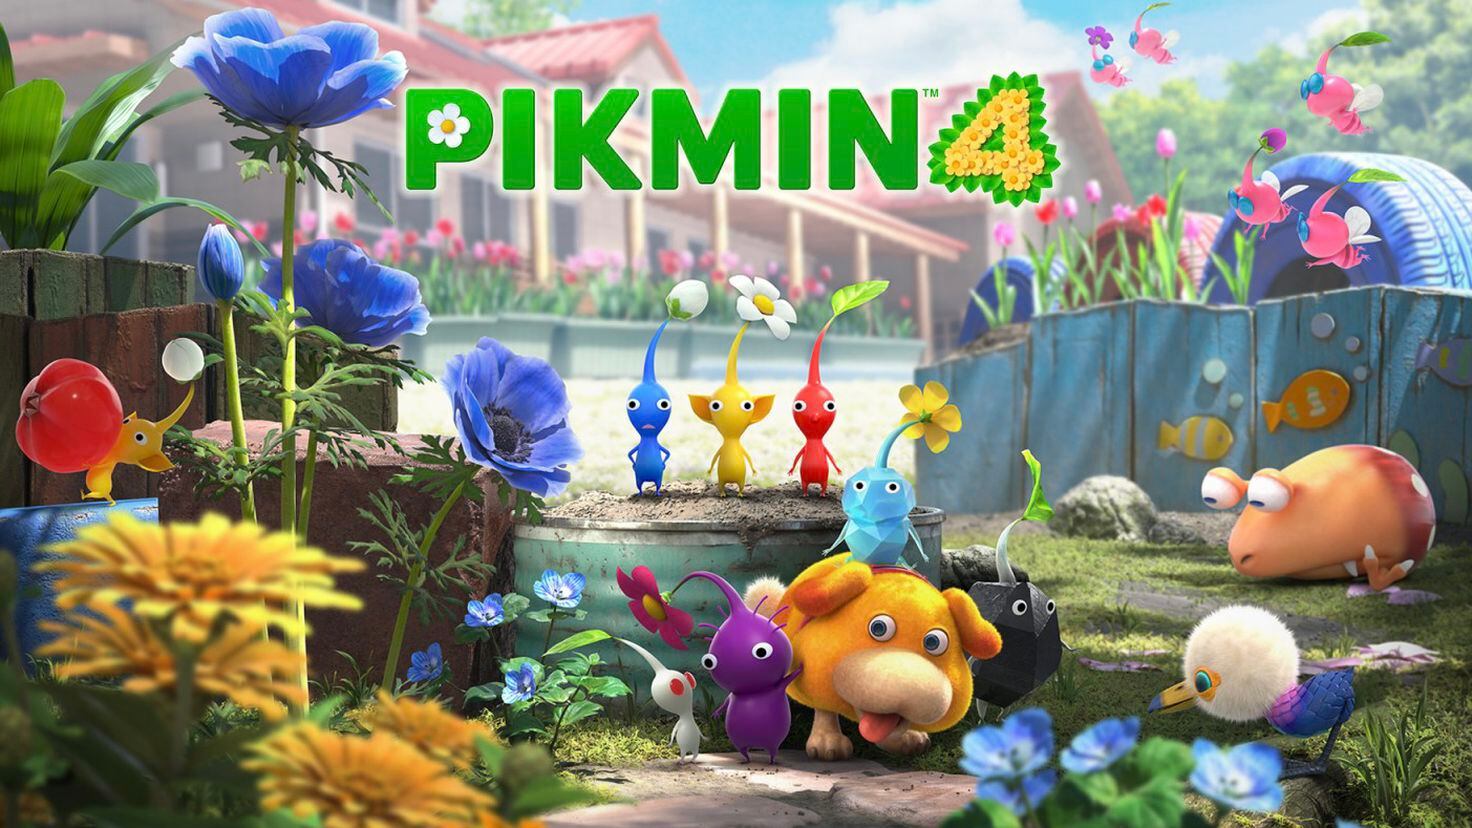 Blossom into Spring with Prime Gaming's March Offerings